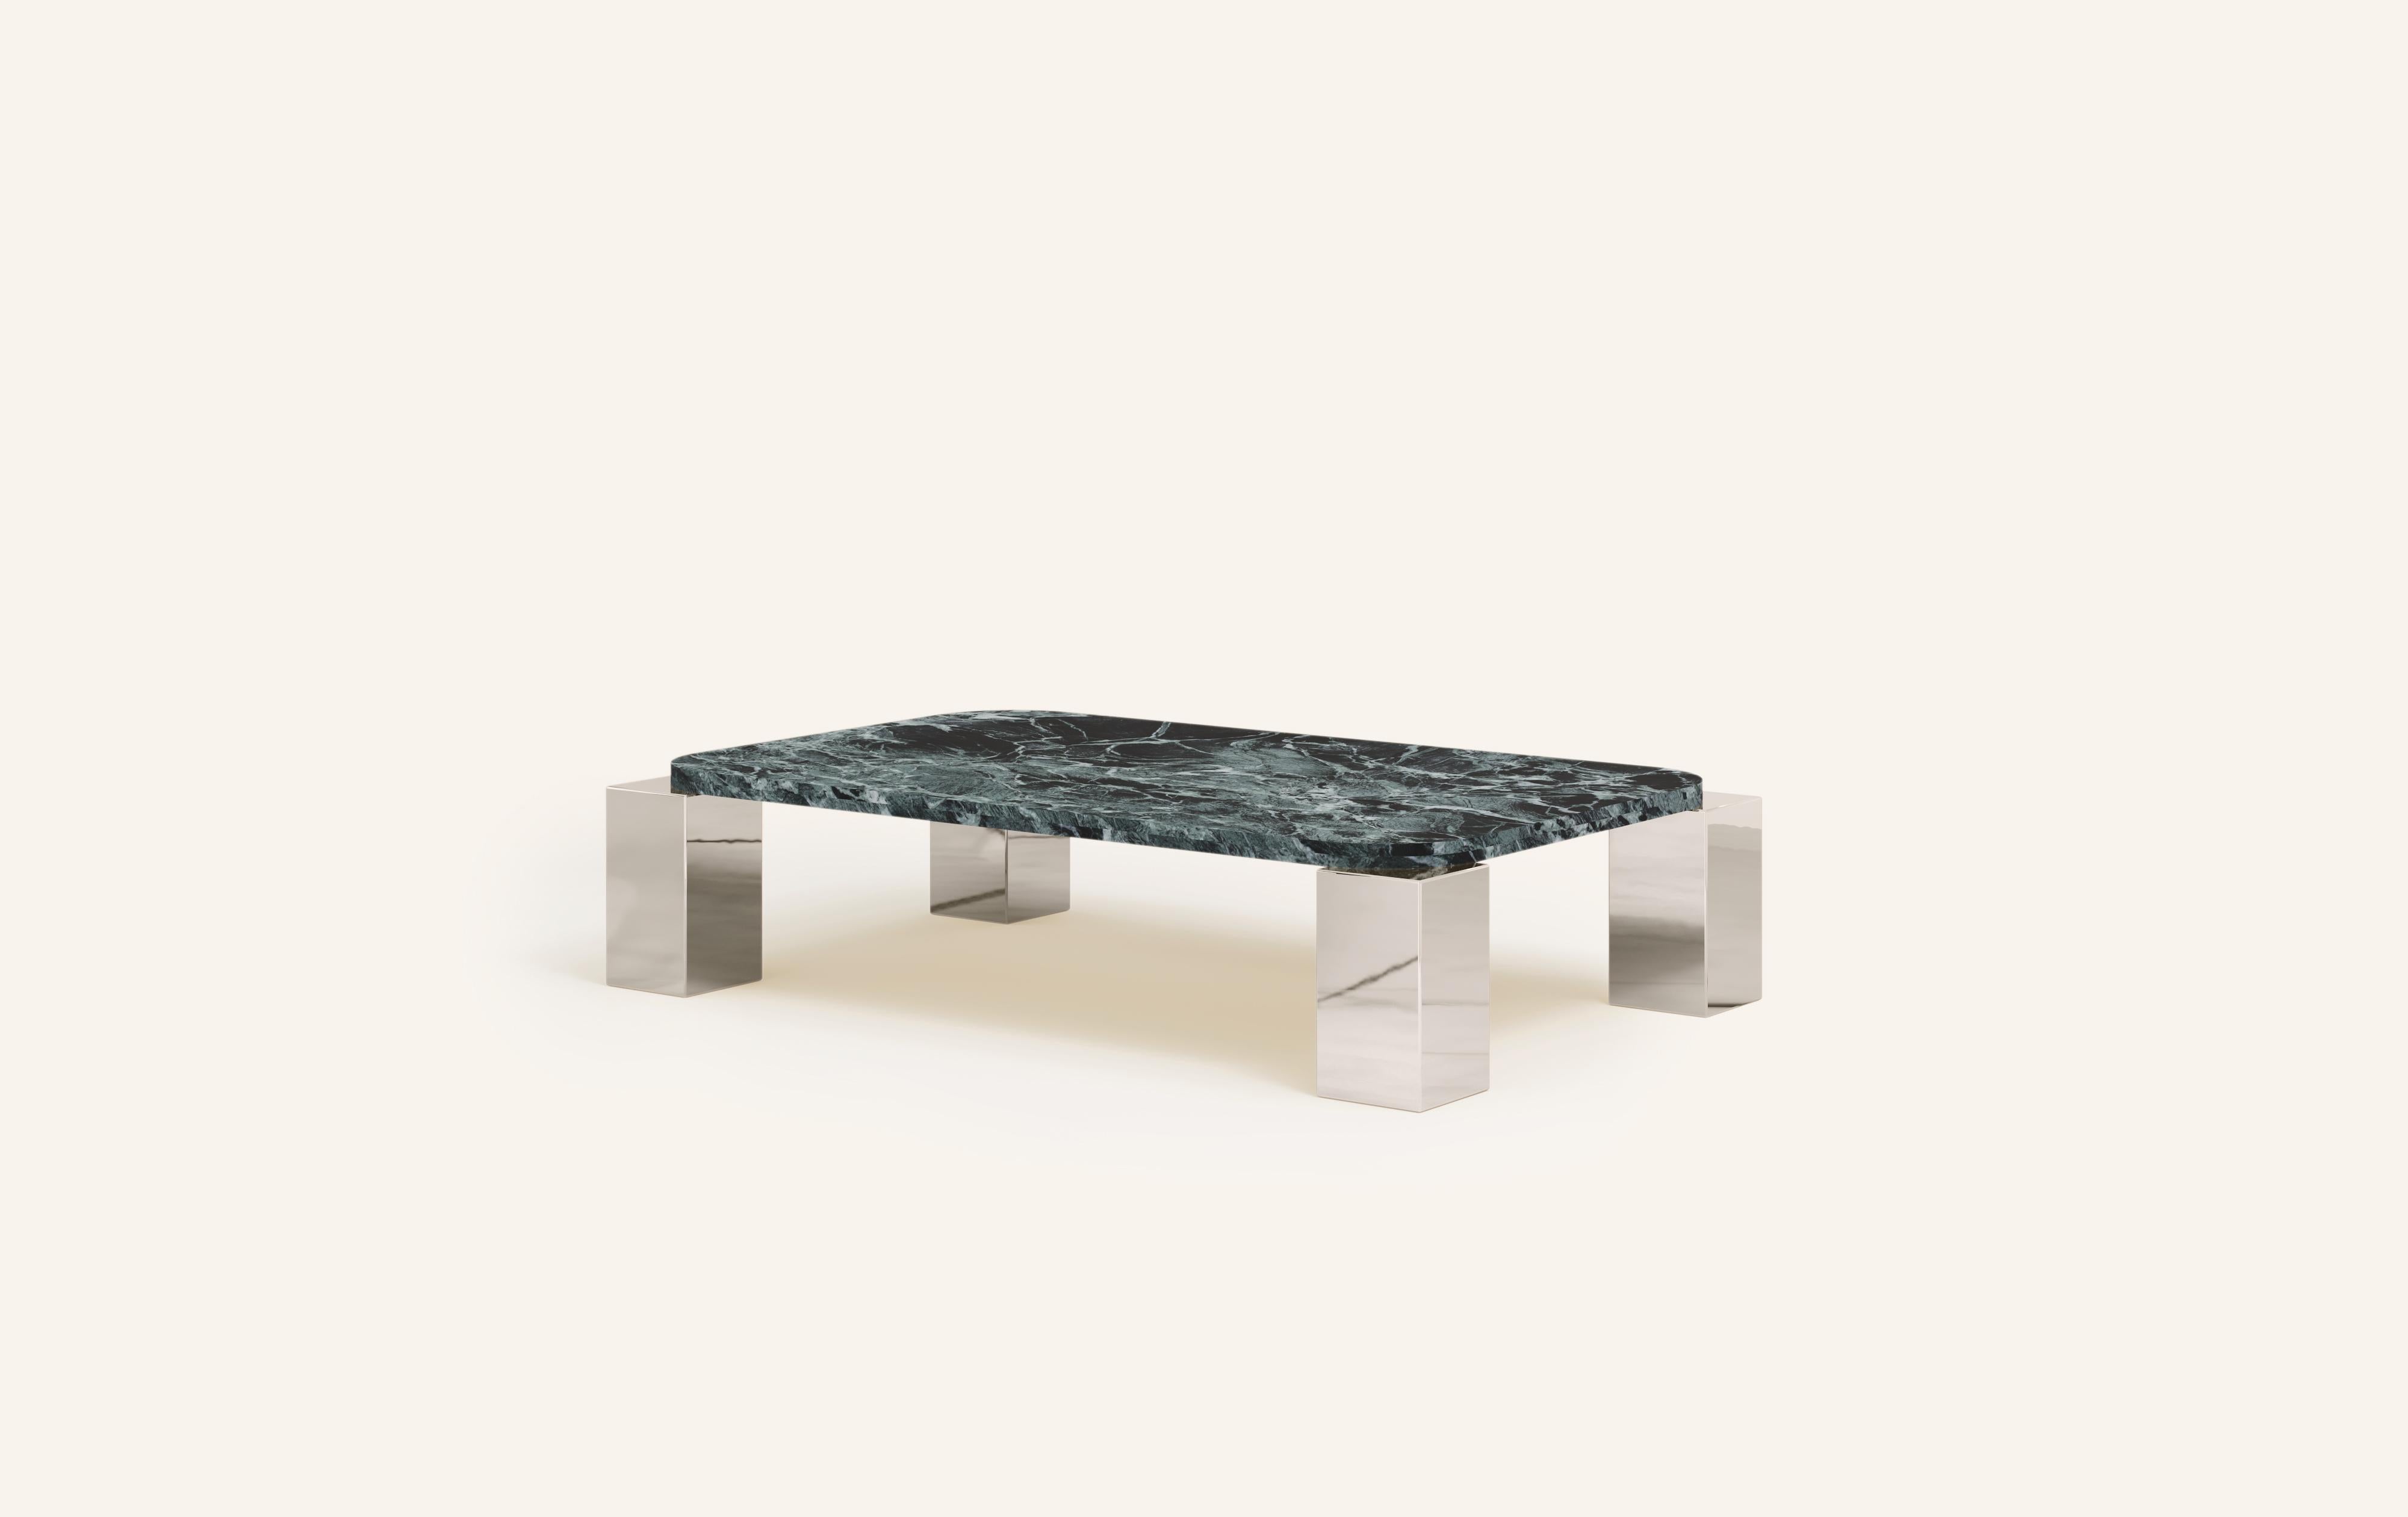 Organic Modern FORM(LA) Cubo Rectangle Coffee Table 50”L x 32”W x 14”H Verde Marble & Chrome For Sale